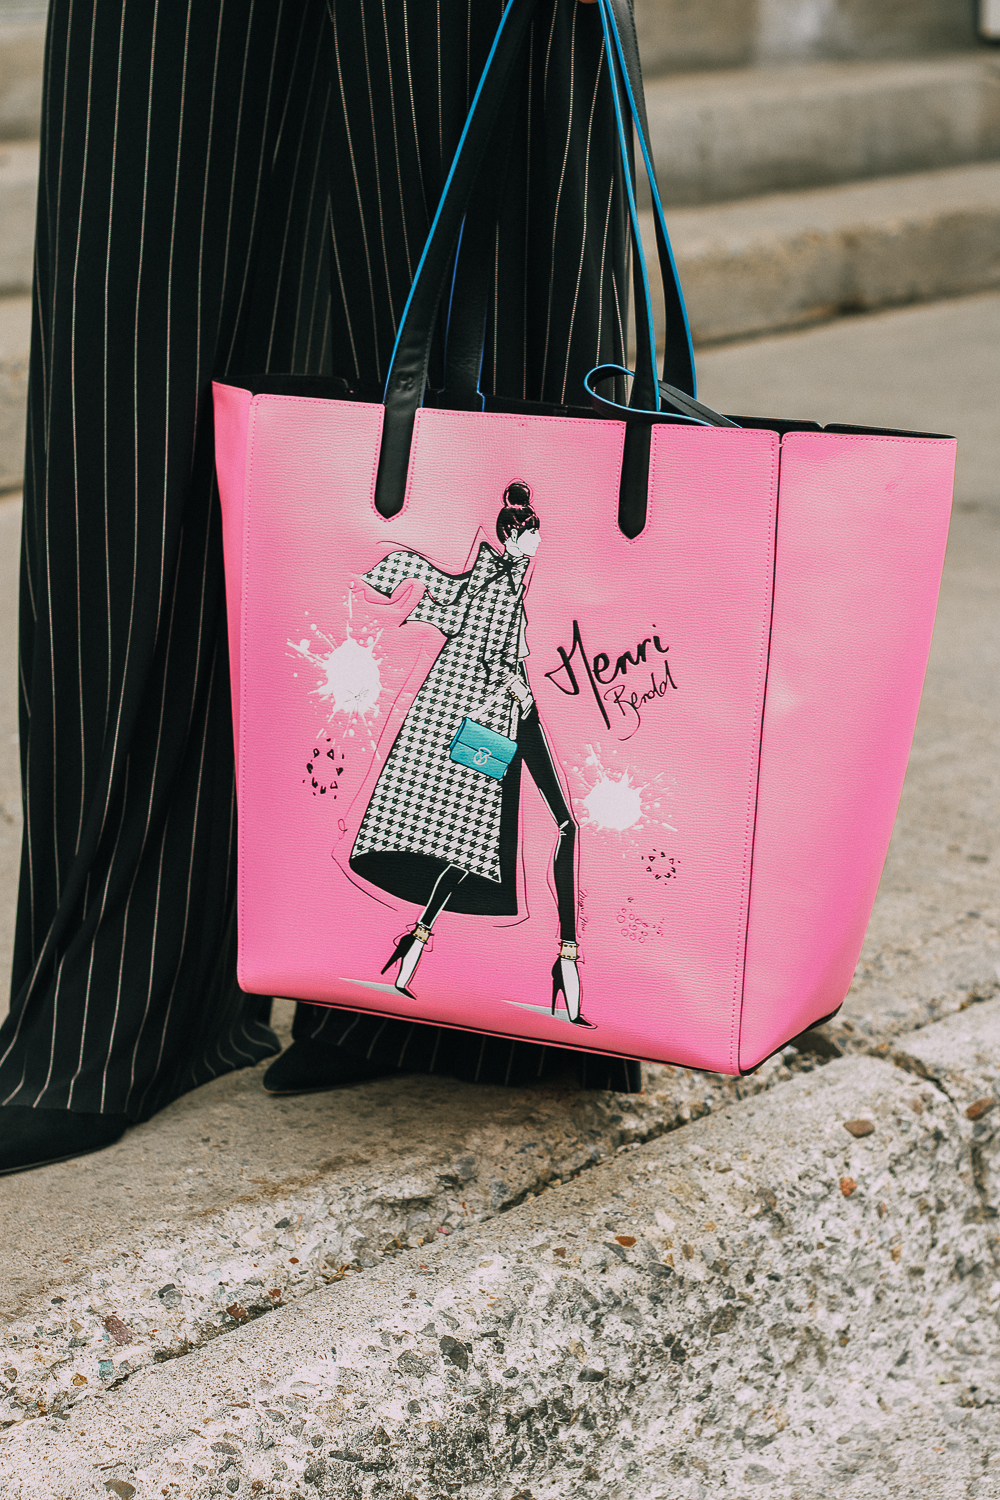 Fall Statement Handbags 2018, this pink Henri Bendel tote is the perfect fall shopping tote! It's SO cute and fun and will fit everything paired with a Joie leather jacket, and pink sunglasses, striped Norma Kamali elephant pants